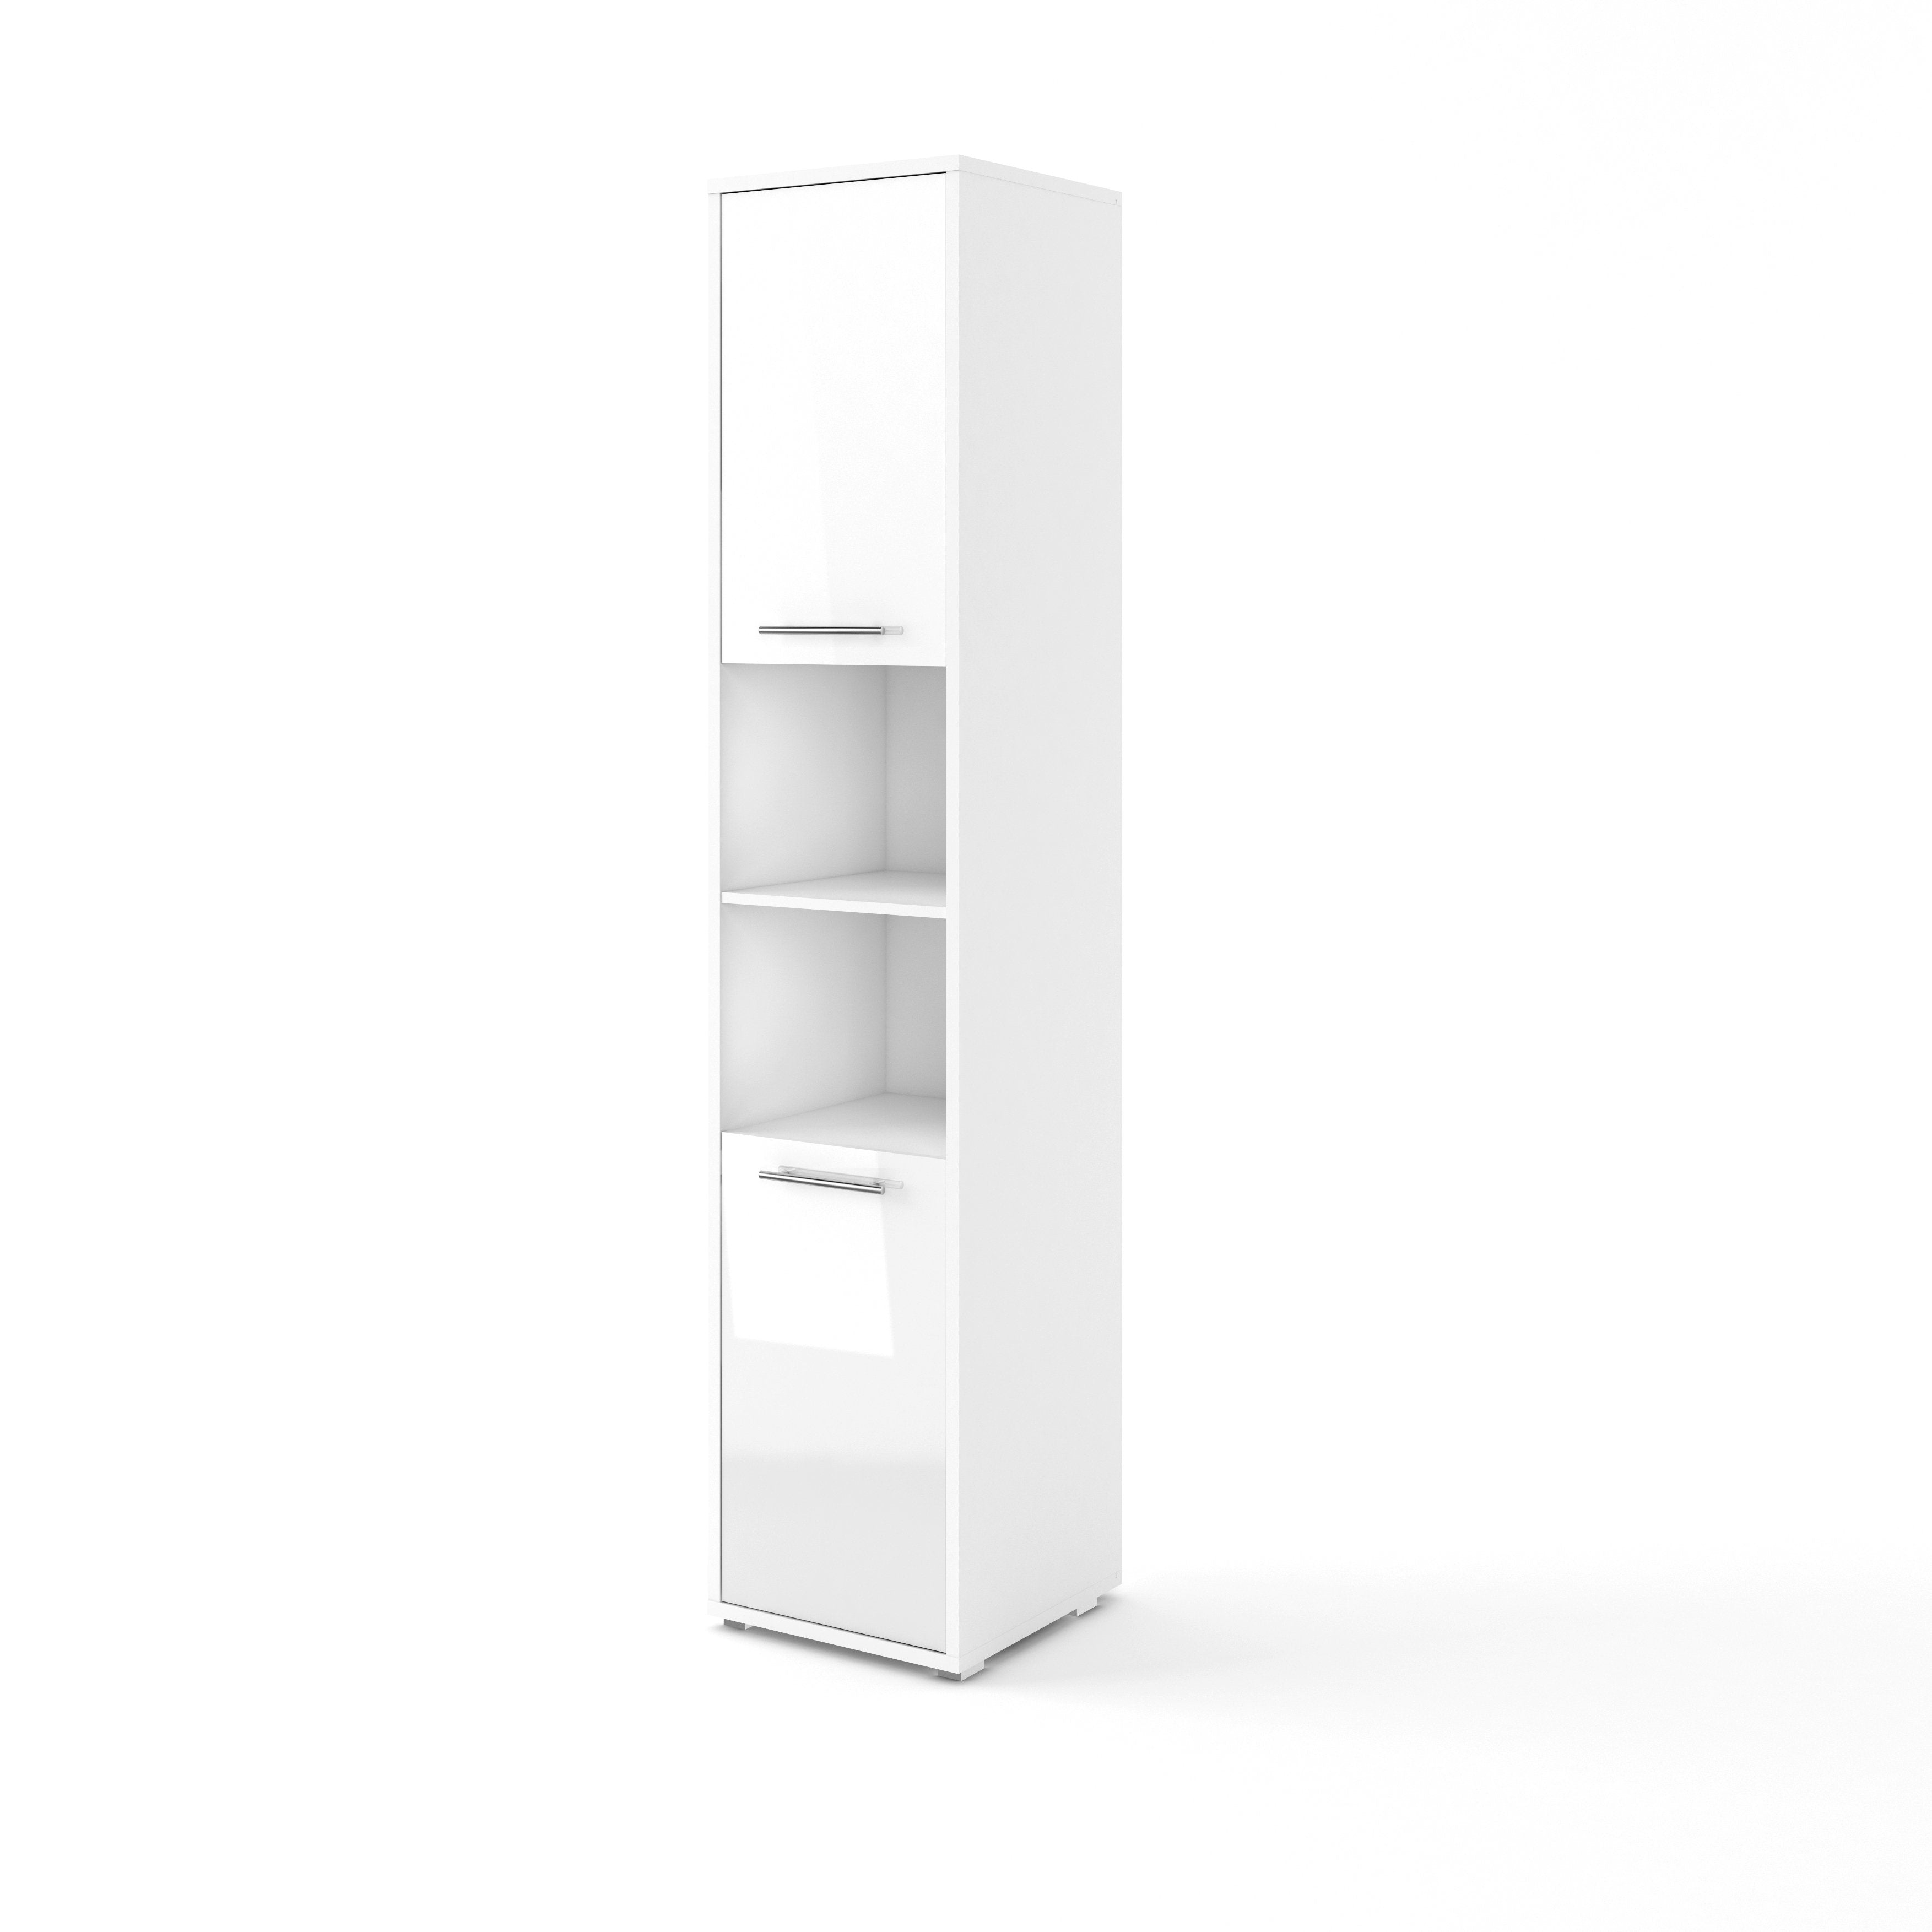 View CP08 Tall Storage Cabinet for Vertical Wall Bed Concept White Gloss 45cm information